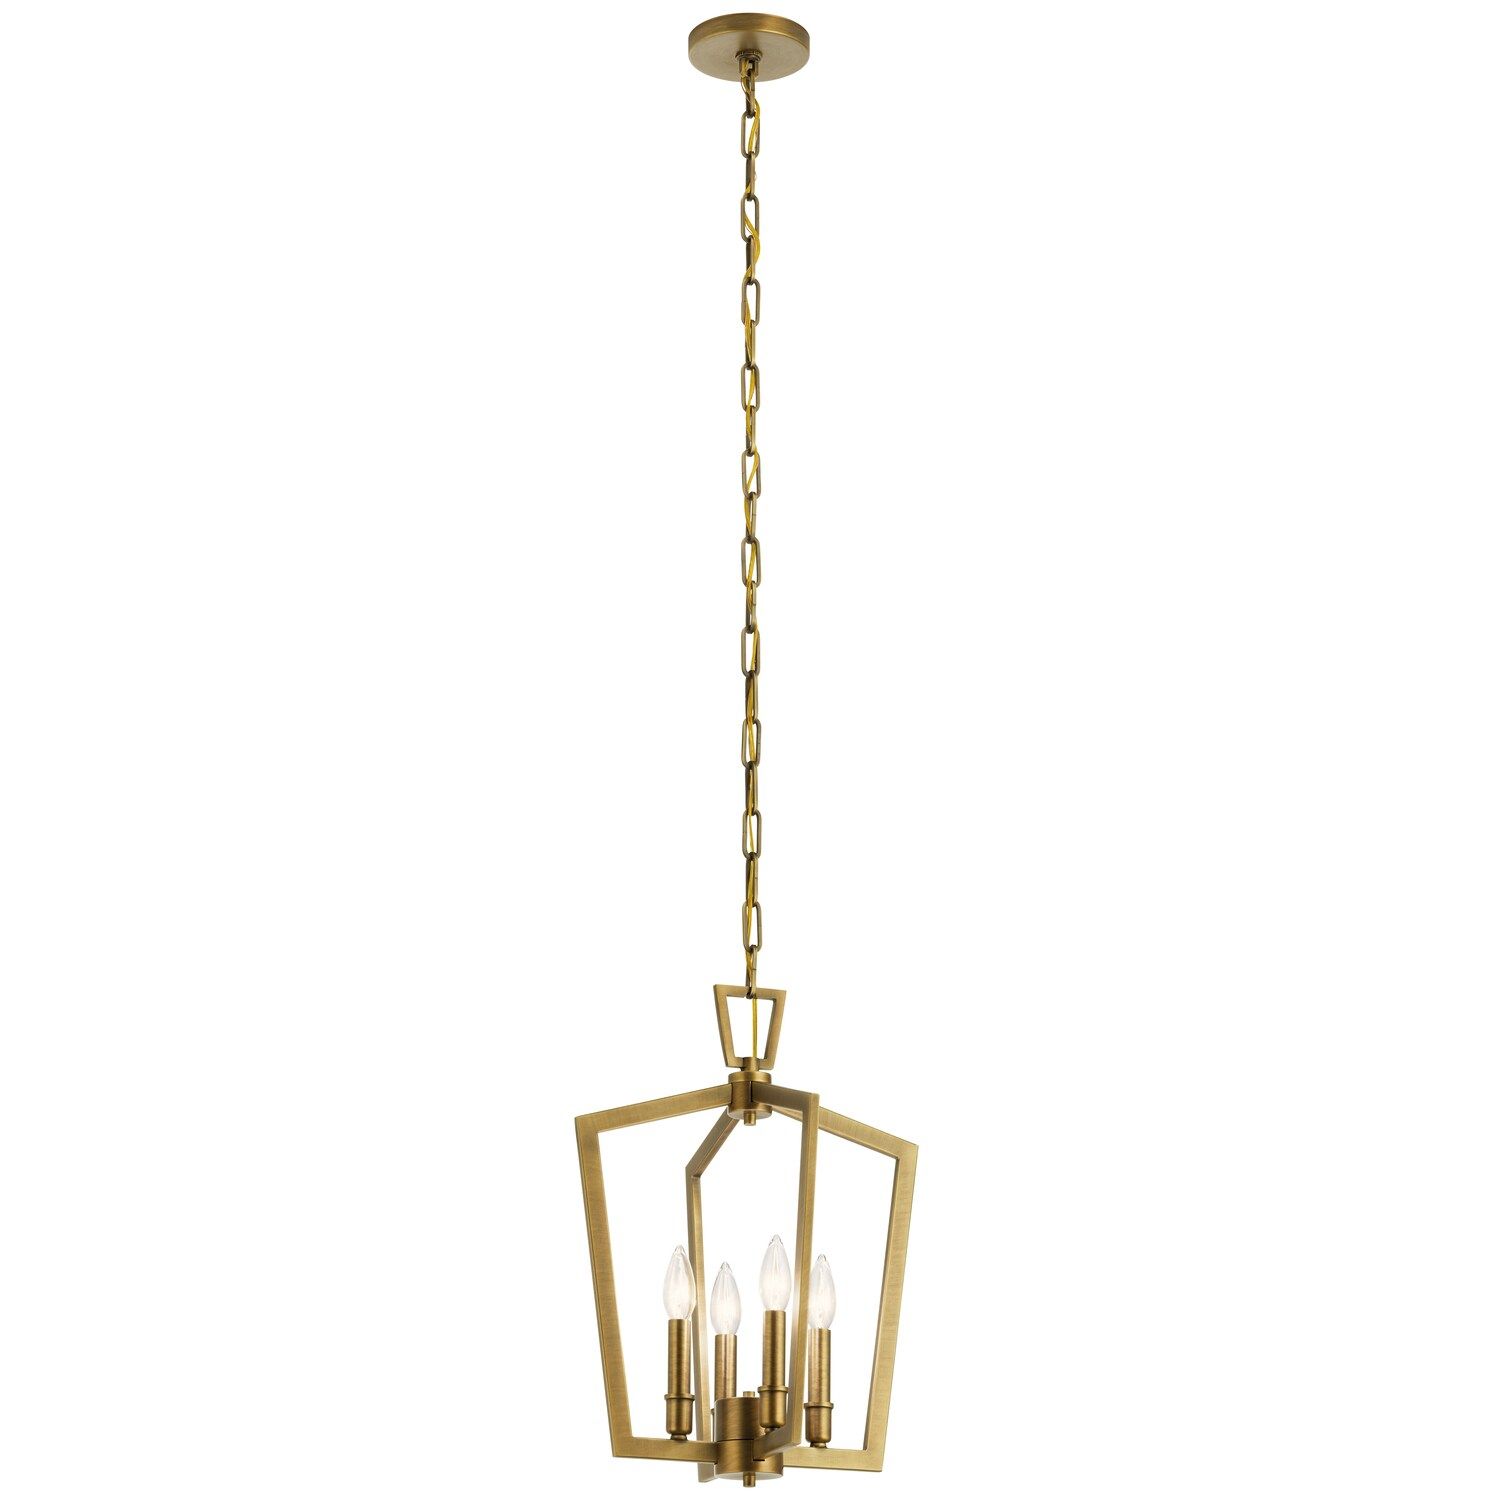 Kichler Abbotswell 4 Light Natural Brass Traditional Lantern Pendant Light  In The Pendant Lighting Department At Lowes Intended For Natural Brass Lantern Chandeliers (View 14 of 15)